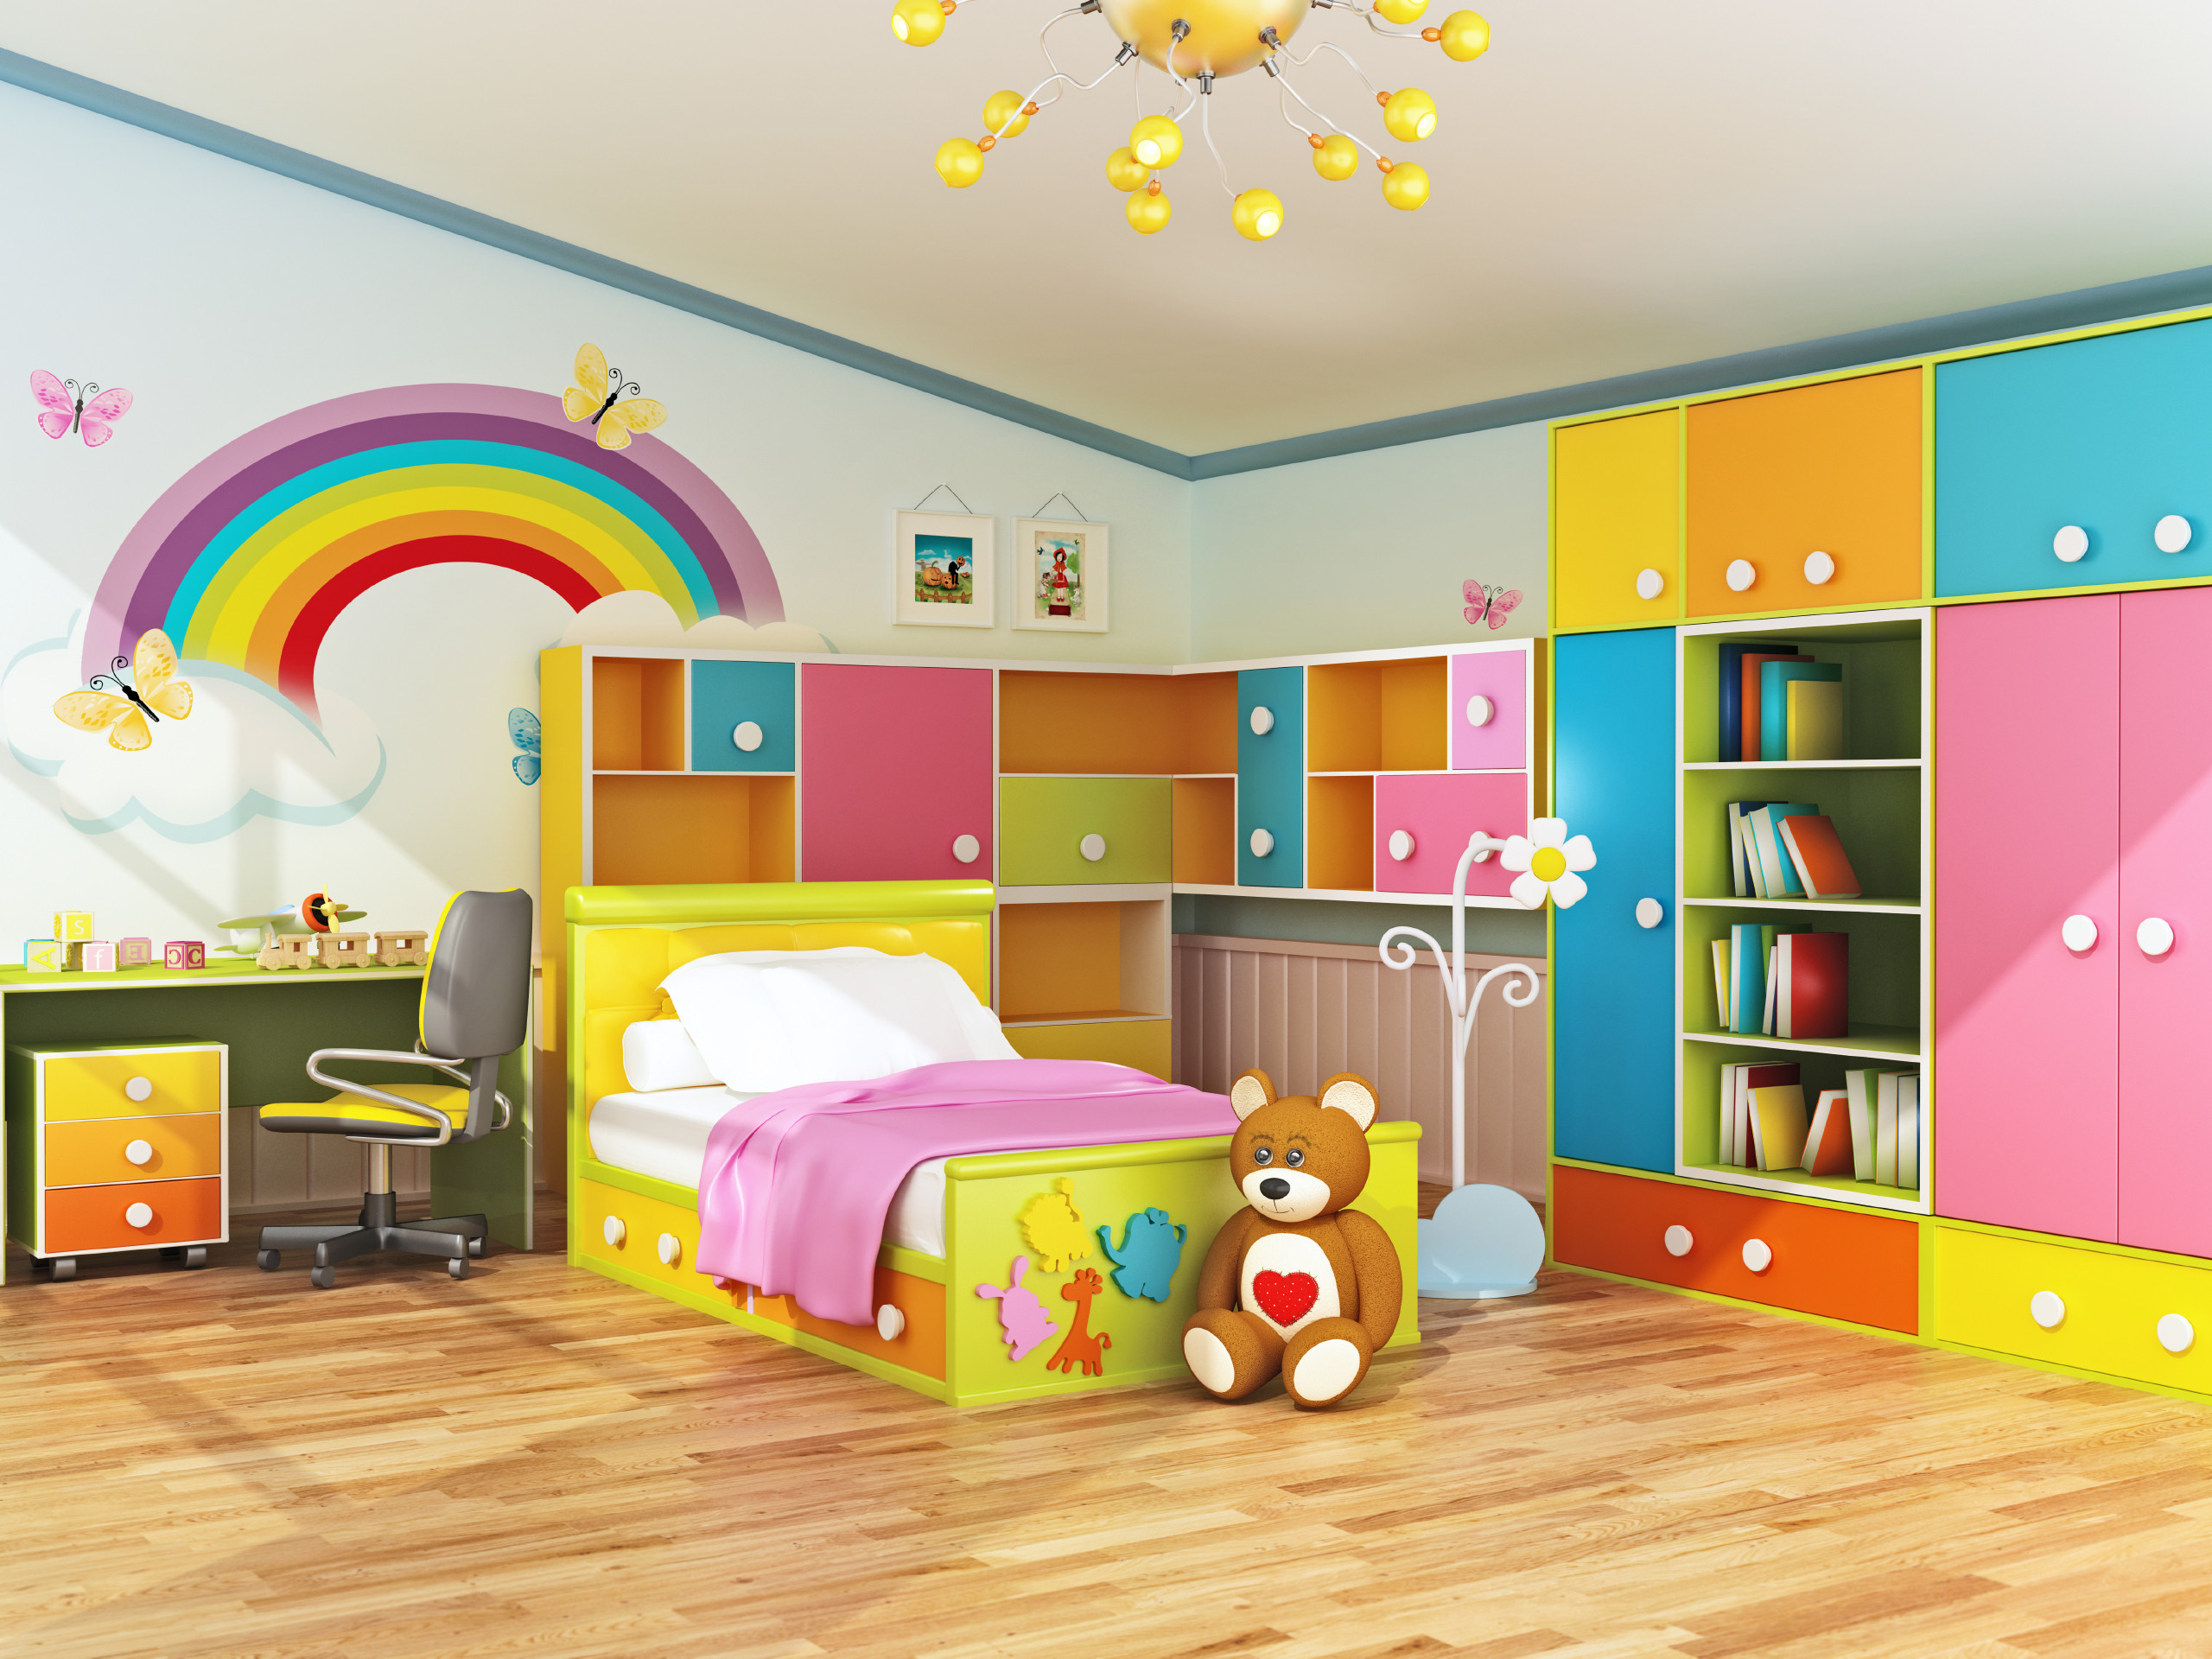 Rooms Design For Kids
 Plan Ahead When Decorating Kids Bedrooms